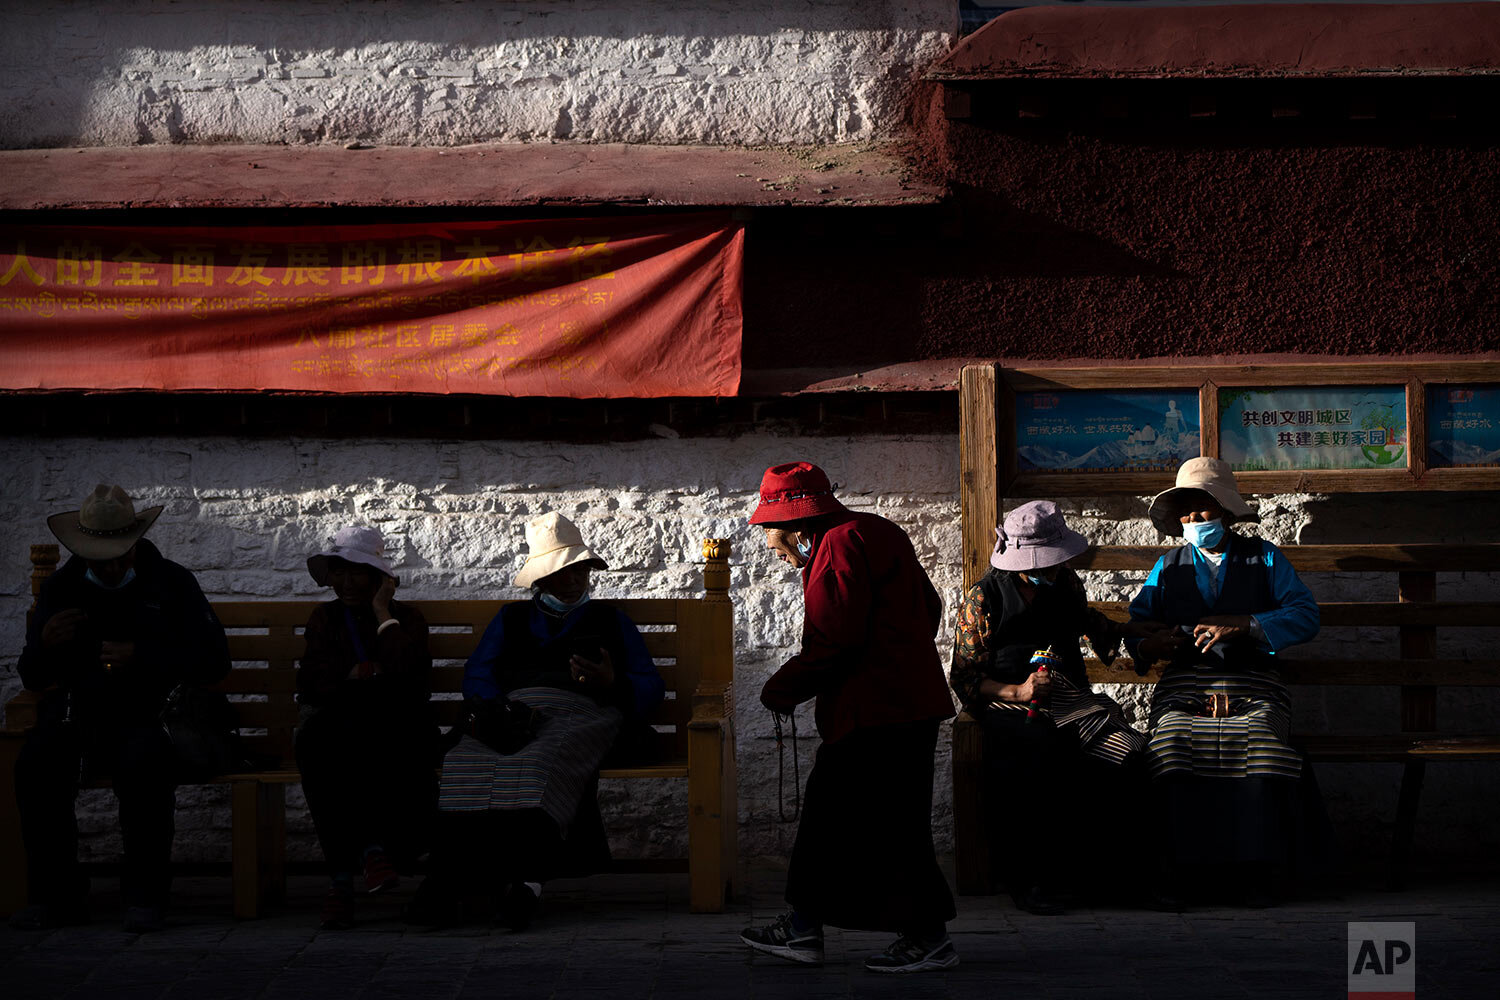  A member of the Buddhist faithful circumnavigates the Jokhang Temple as others rest on benches in Lhasa in western China's Tibet Autonomous Region, as seen during a government organized visit for foreign journalists, Tuesday, June 1, 2021. (AP Photo